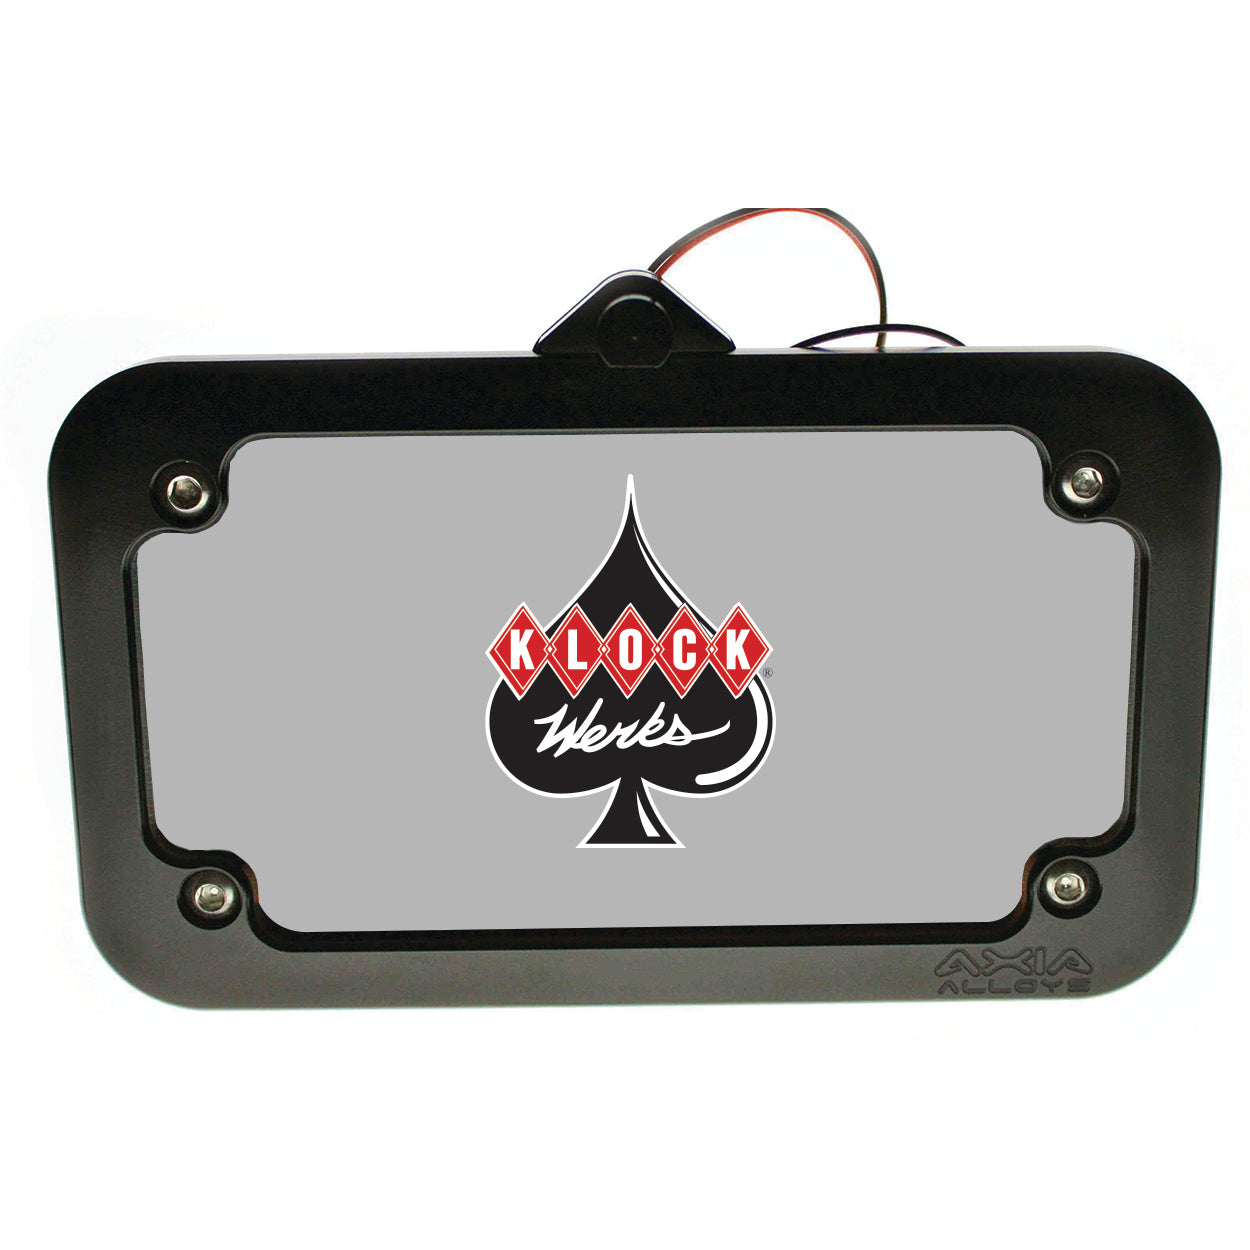 UNIVERSAL LICENSE PLATE HOLDER WITH 12 LEDS LIGHTS CE APPROVED - FOR 50CC  LICENSE PLATES